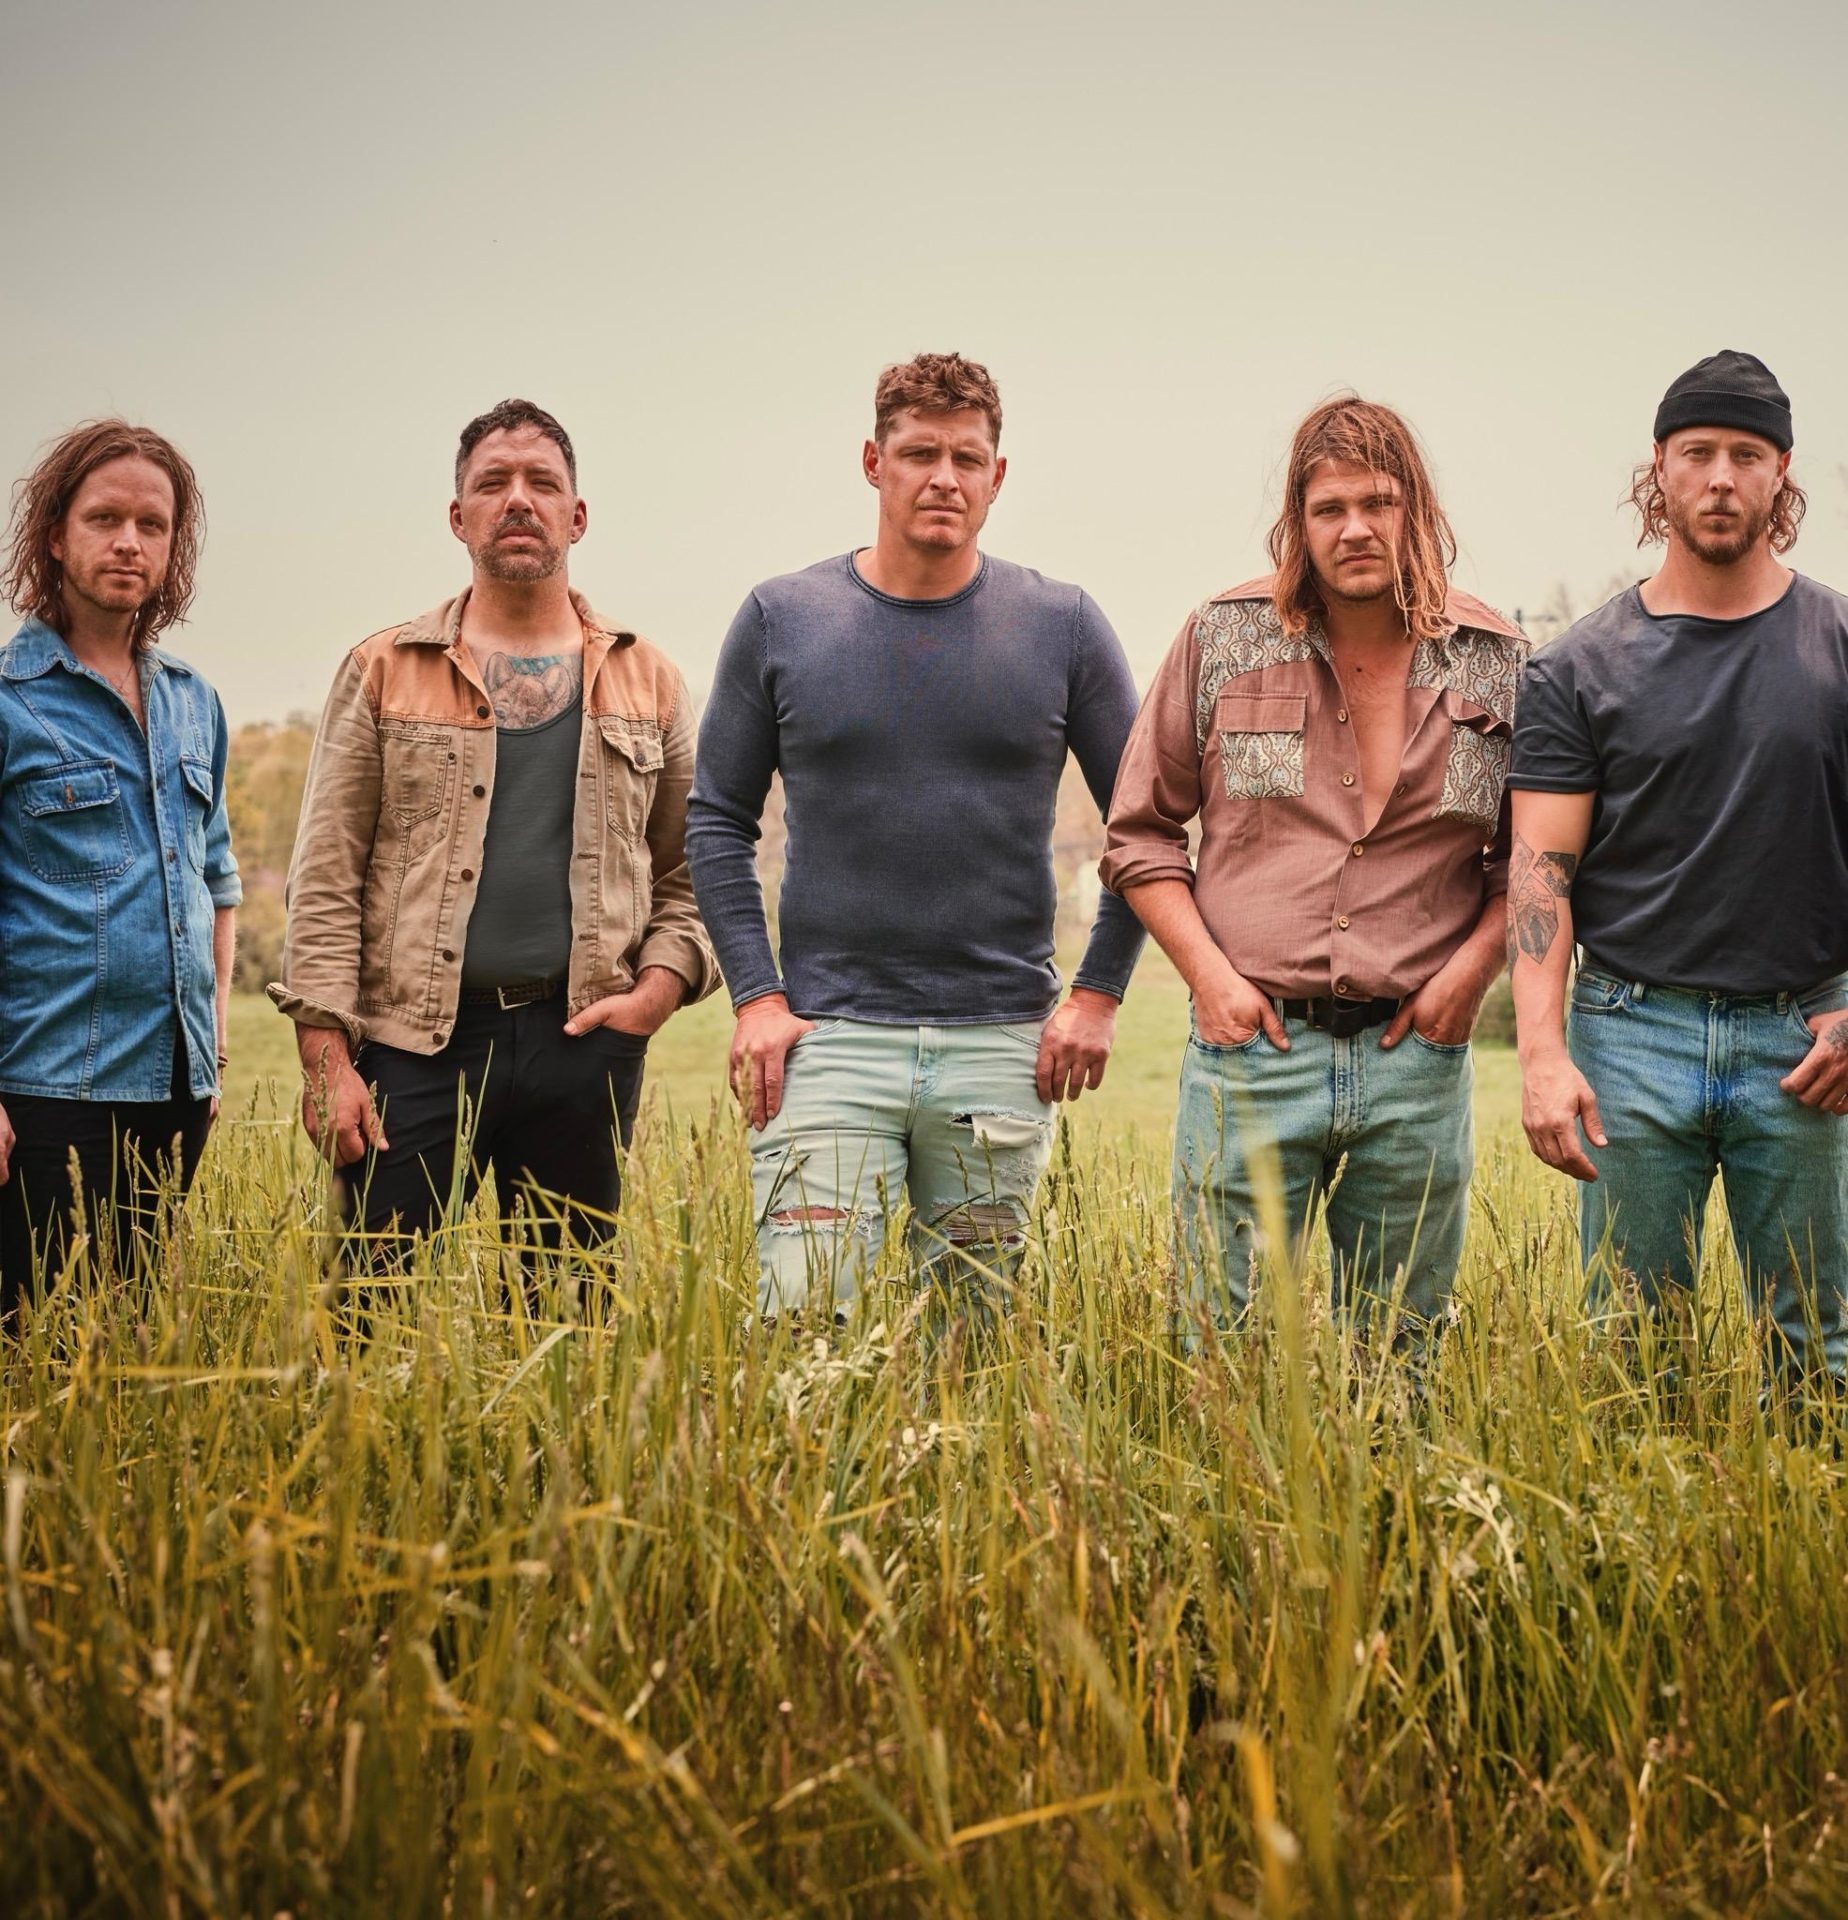 5 band members of The Glorious Sons standing in a field of grass.